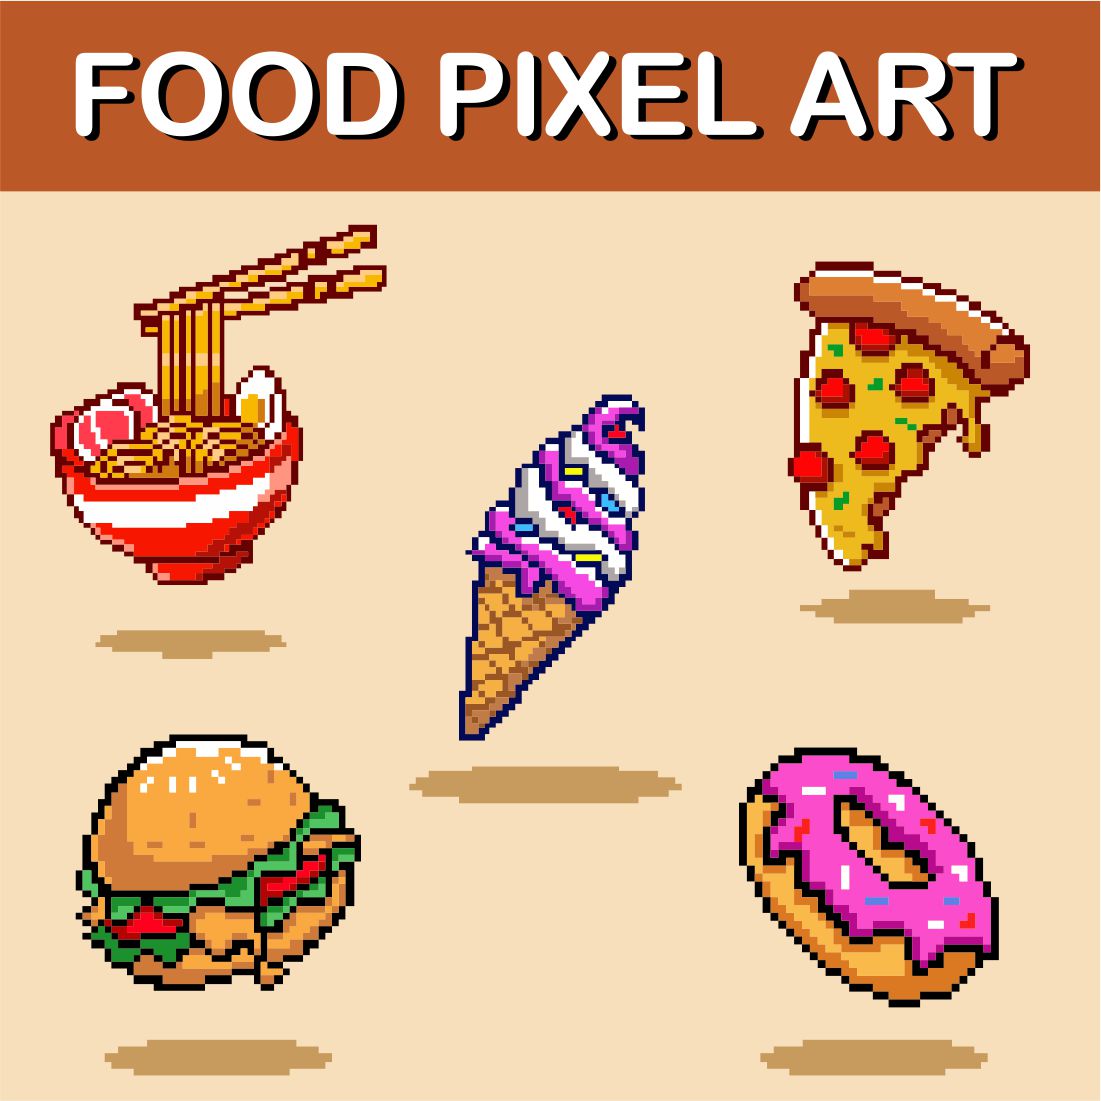 Food Pixel Art - Only $ 11 preview image.